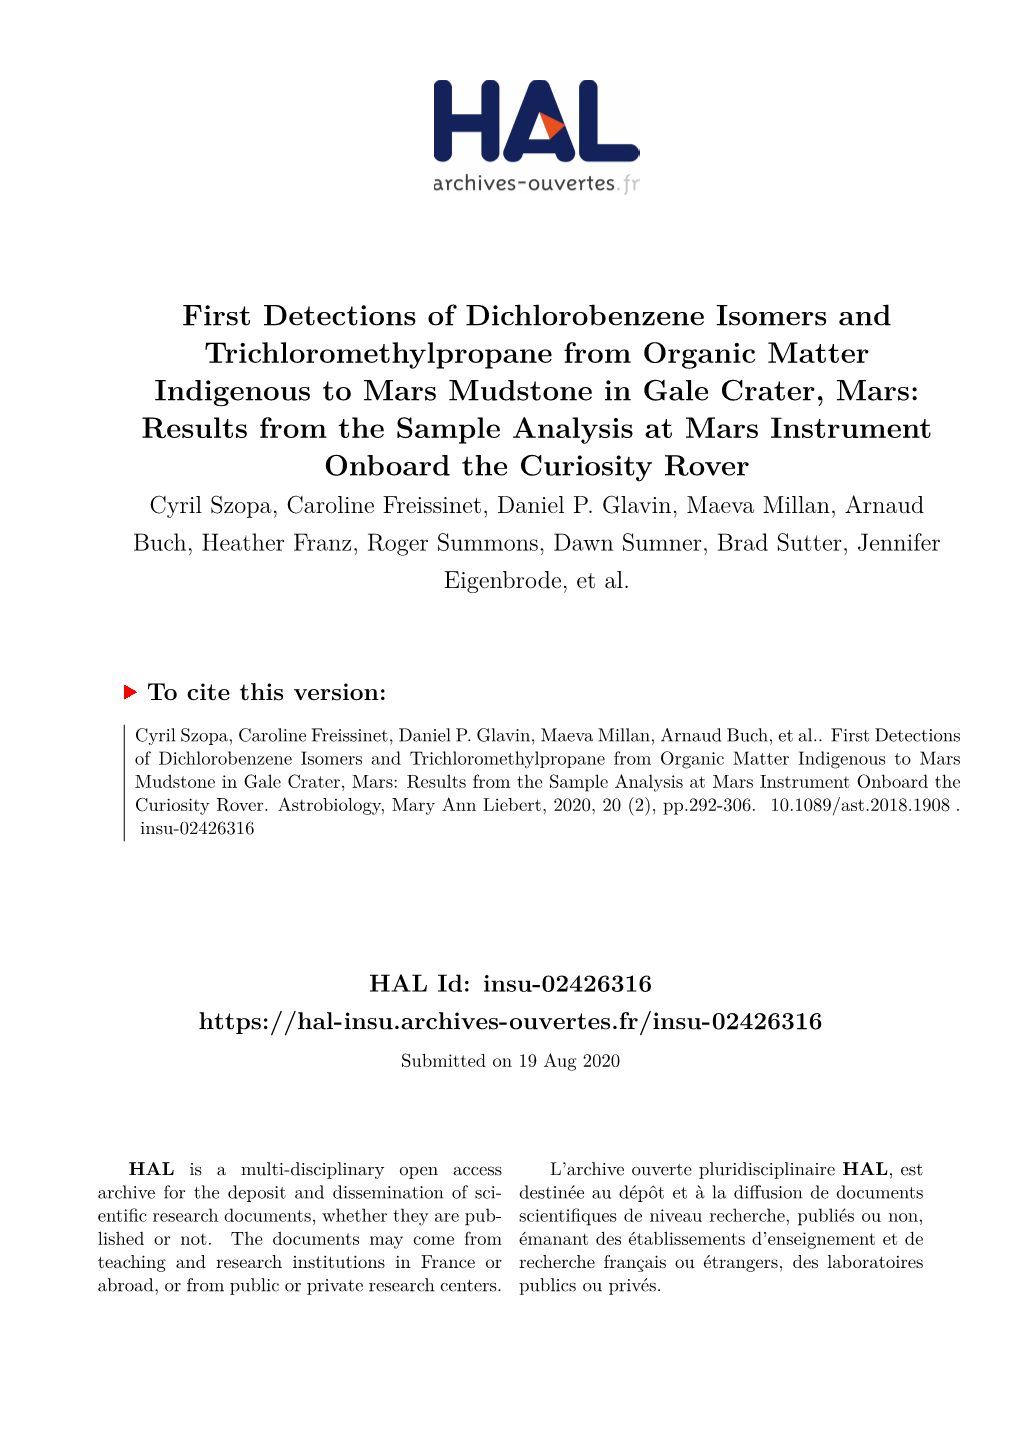 First Detections of Dichlorobenzene Isomers And